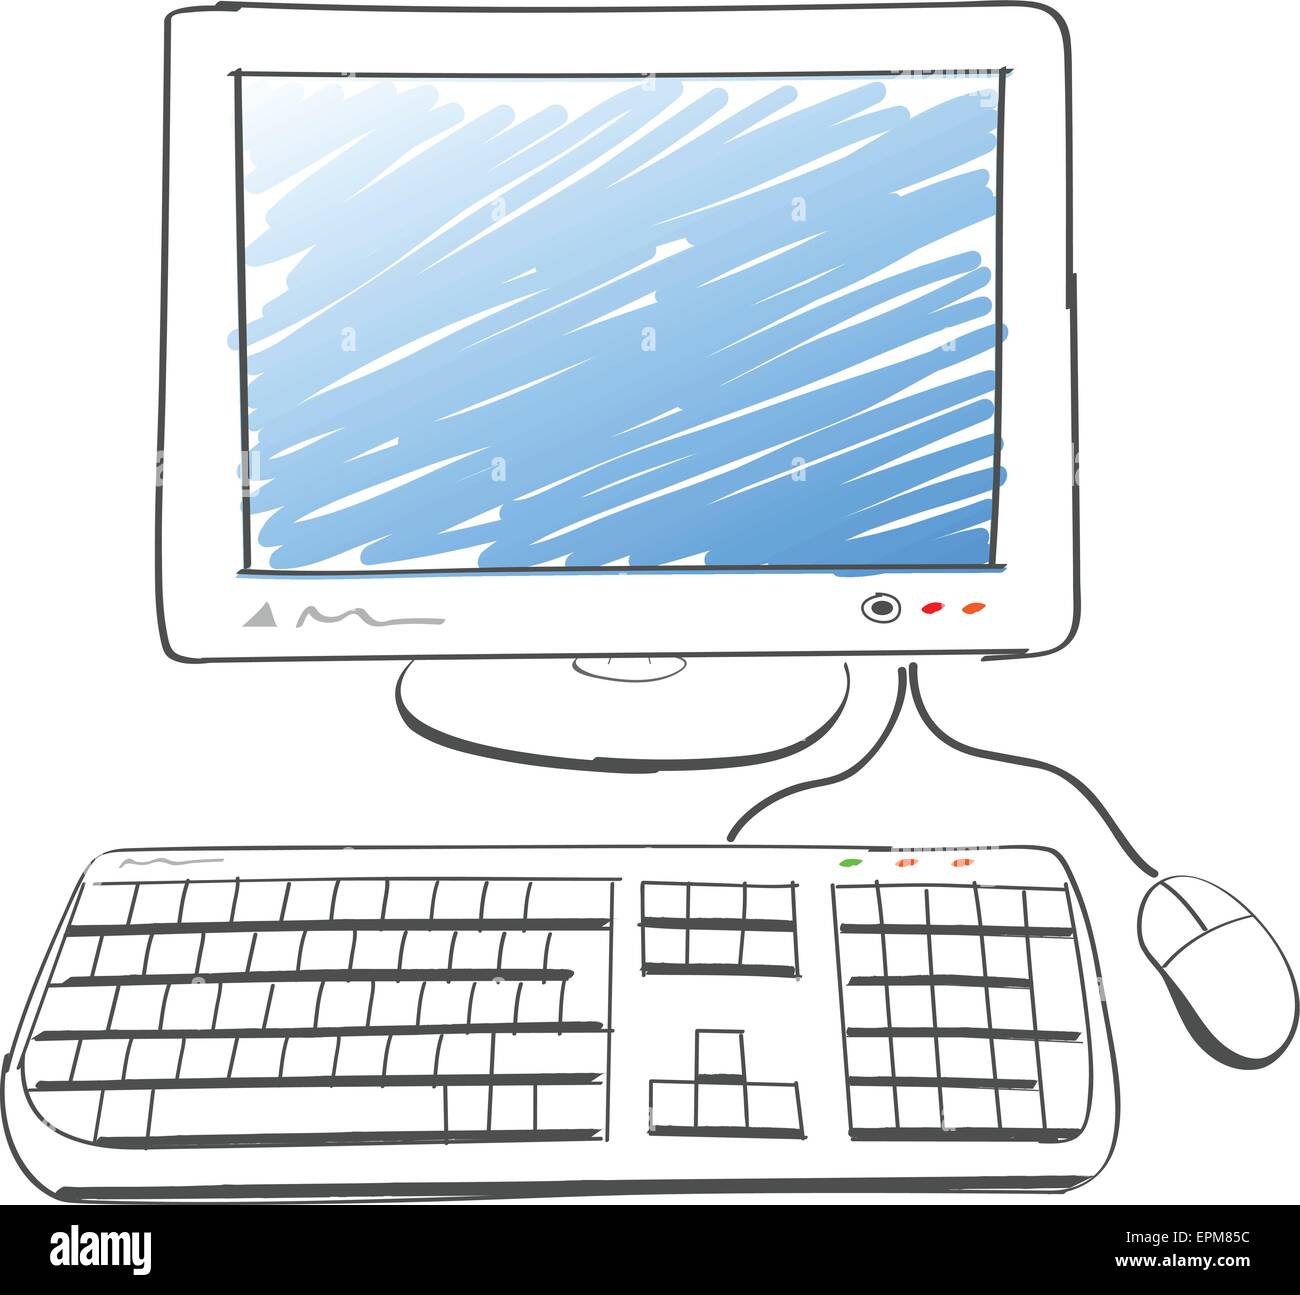 Illustration Of Computer Drawing On White Background Stock Vector